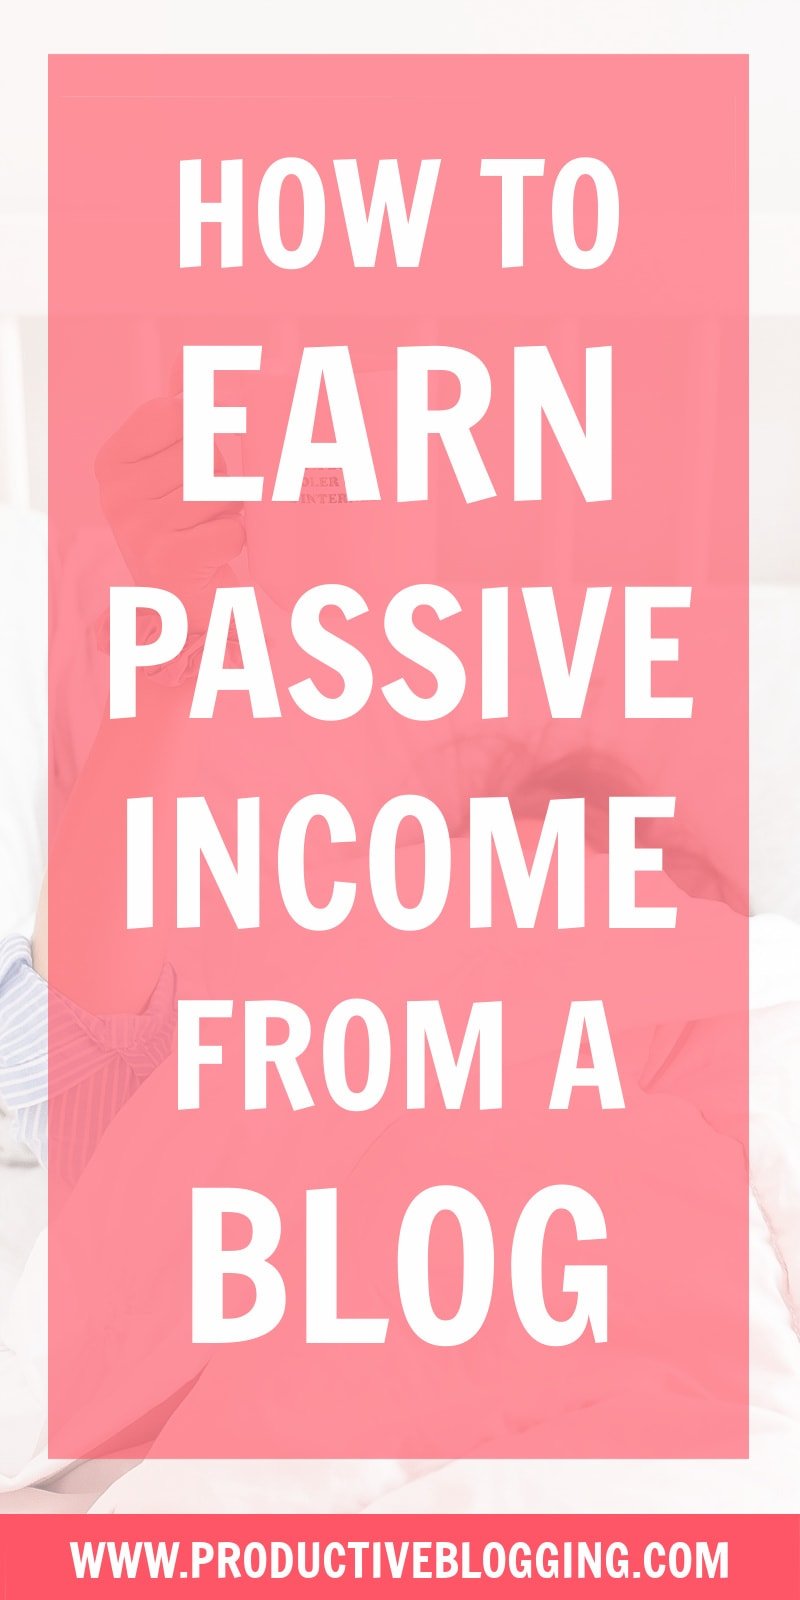 Is it possible to earn passive income from a blog? Absolutely! In fact, it’s possible to earn a really good full-time income passively from a blog. Here’s how… #makemoneyblogging #monetizeyourblog #passiveincome #earnpassiveincome #passiveblogging #passiveincomeblogging #blogginglife #bloglife #bloggersofIG #professionalblogger #bloggingismyjob #solopreneur #mompreneur #fempreneur #bloggingbiz #bloggingtips #productivitytips #blogsmarter #blogpassively #blogsmarternotharder #productiveblogging